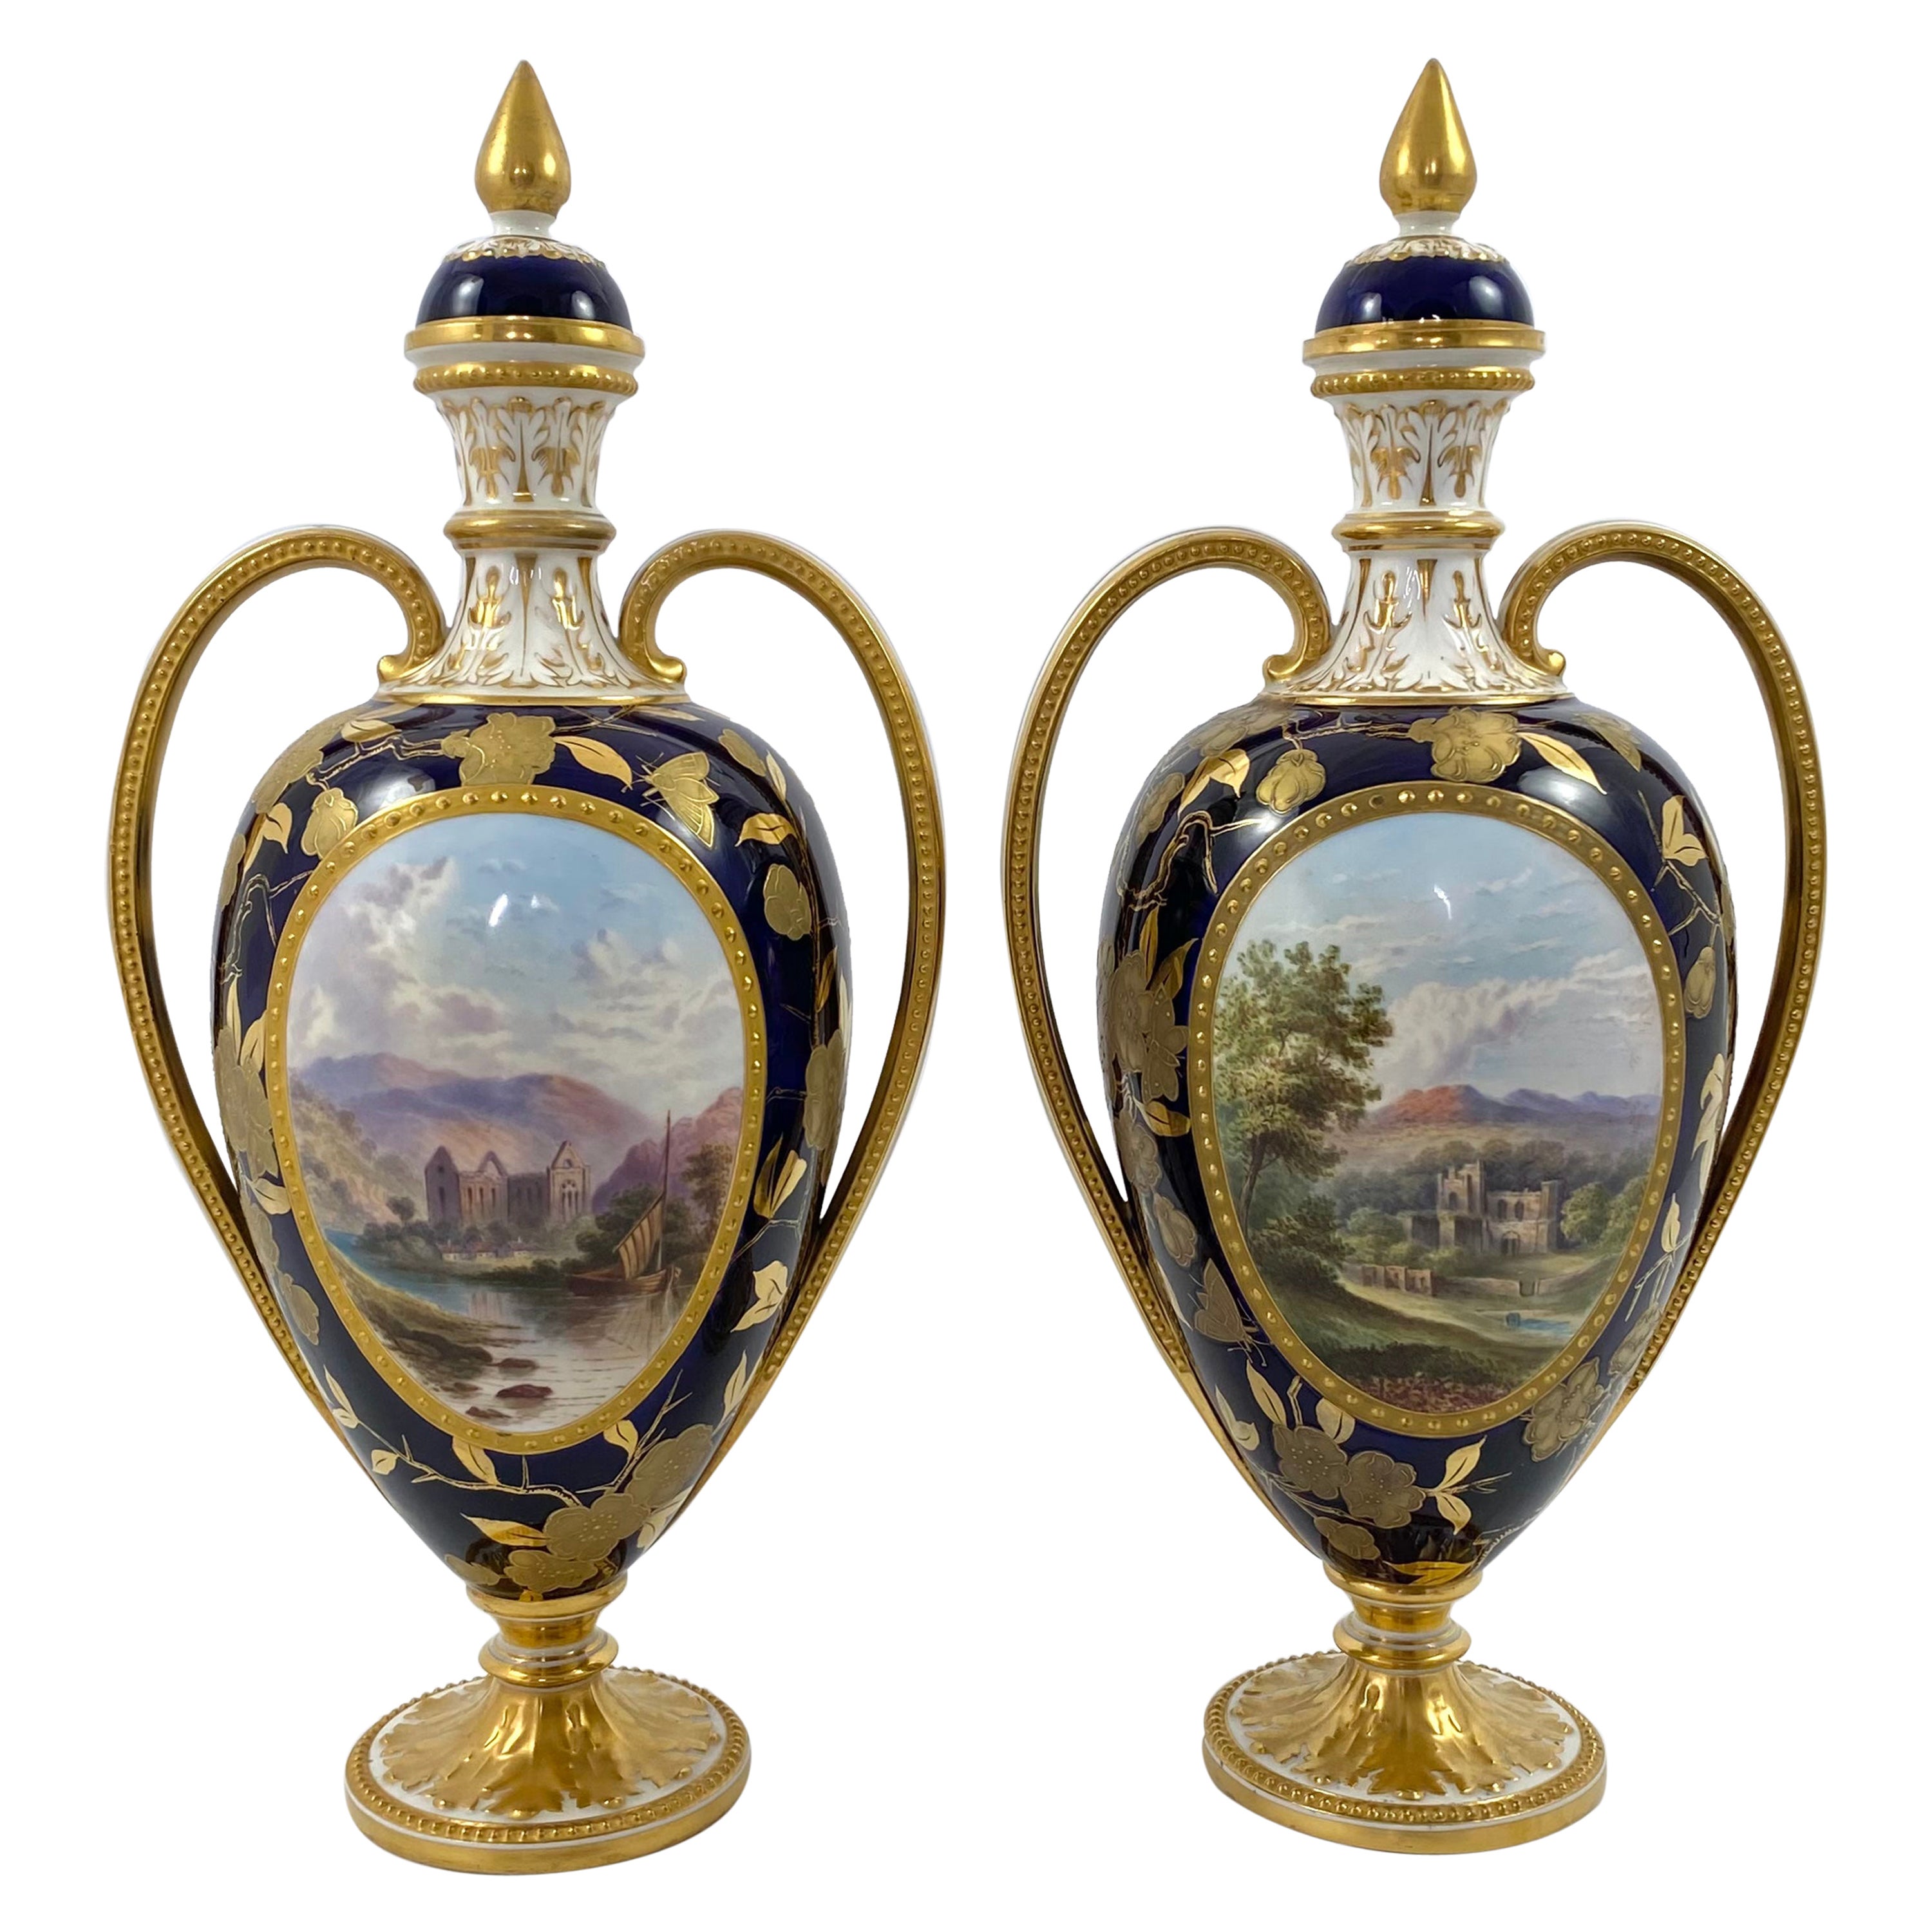 Pair Davenport Porcelain Vases and Covers, c. 1875